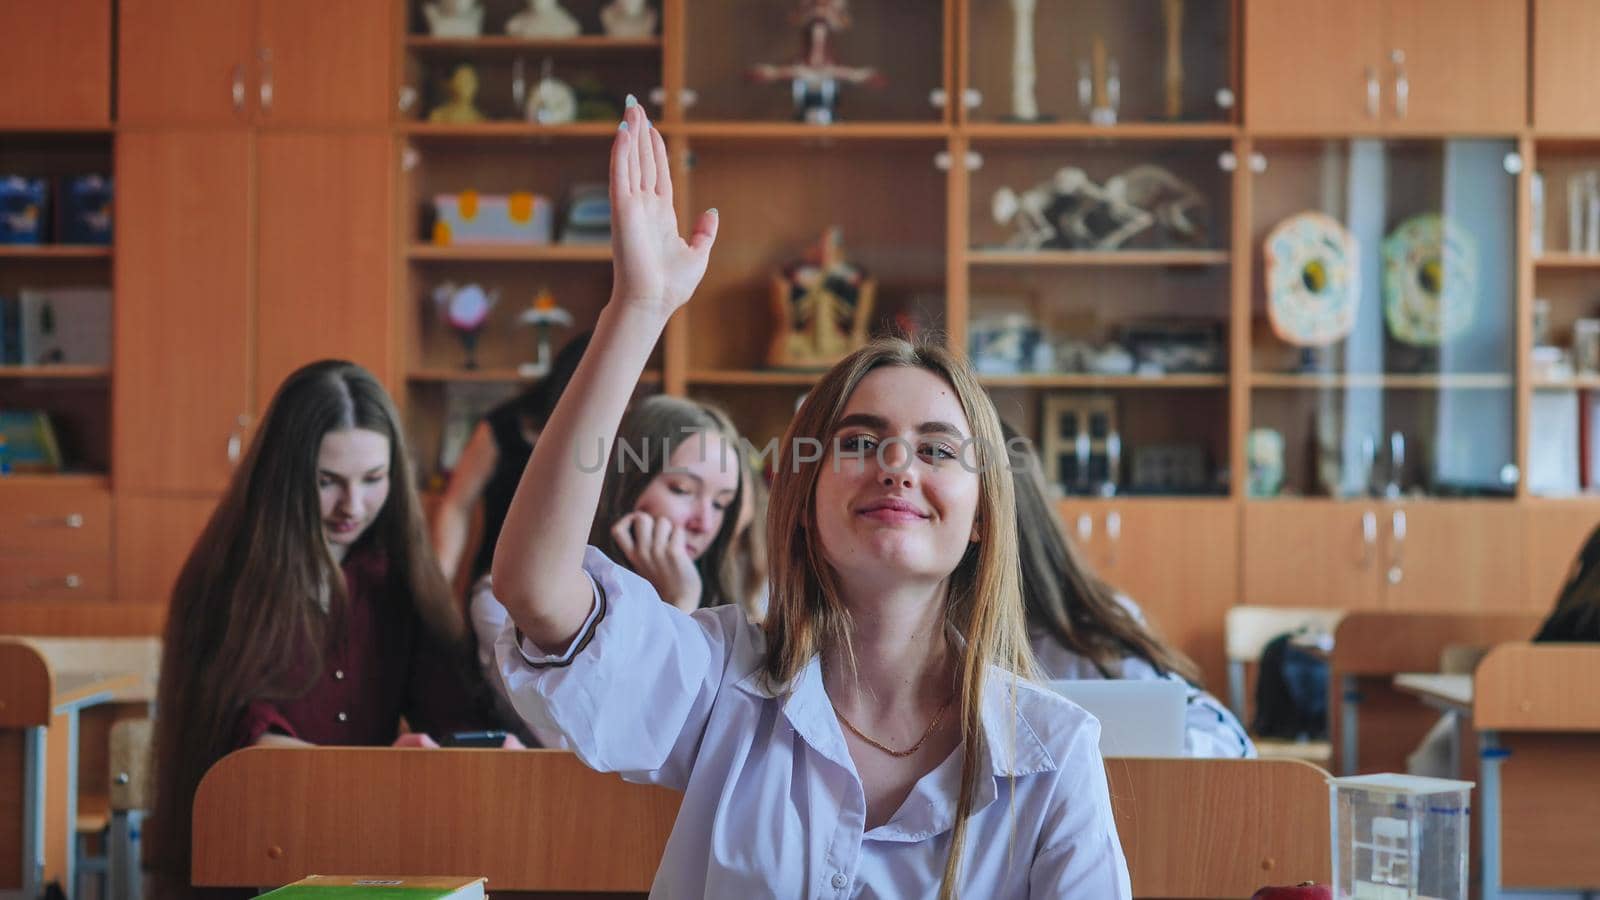 A girl student sitting at a desk raises her hand in the class